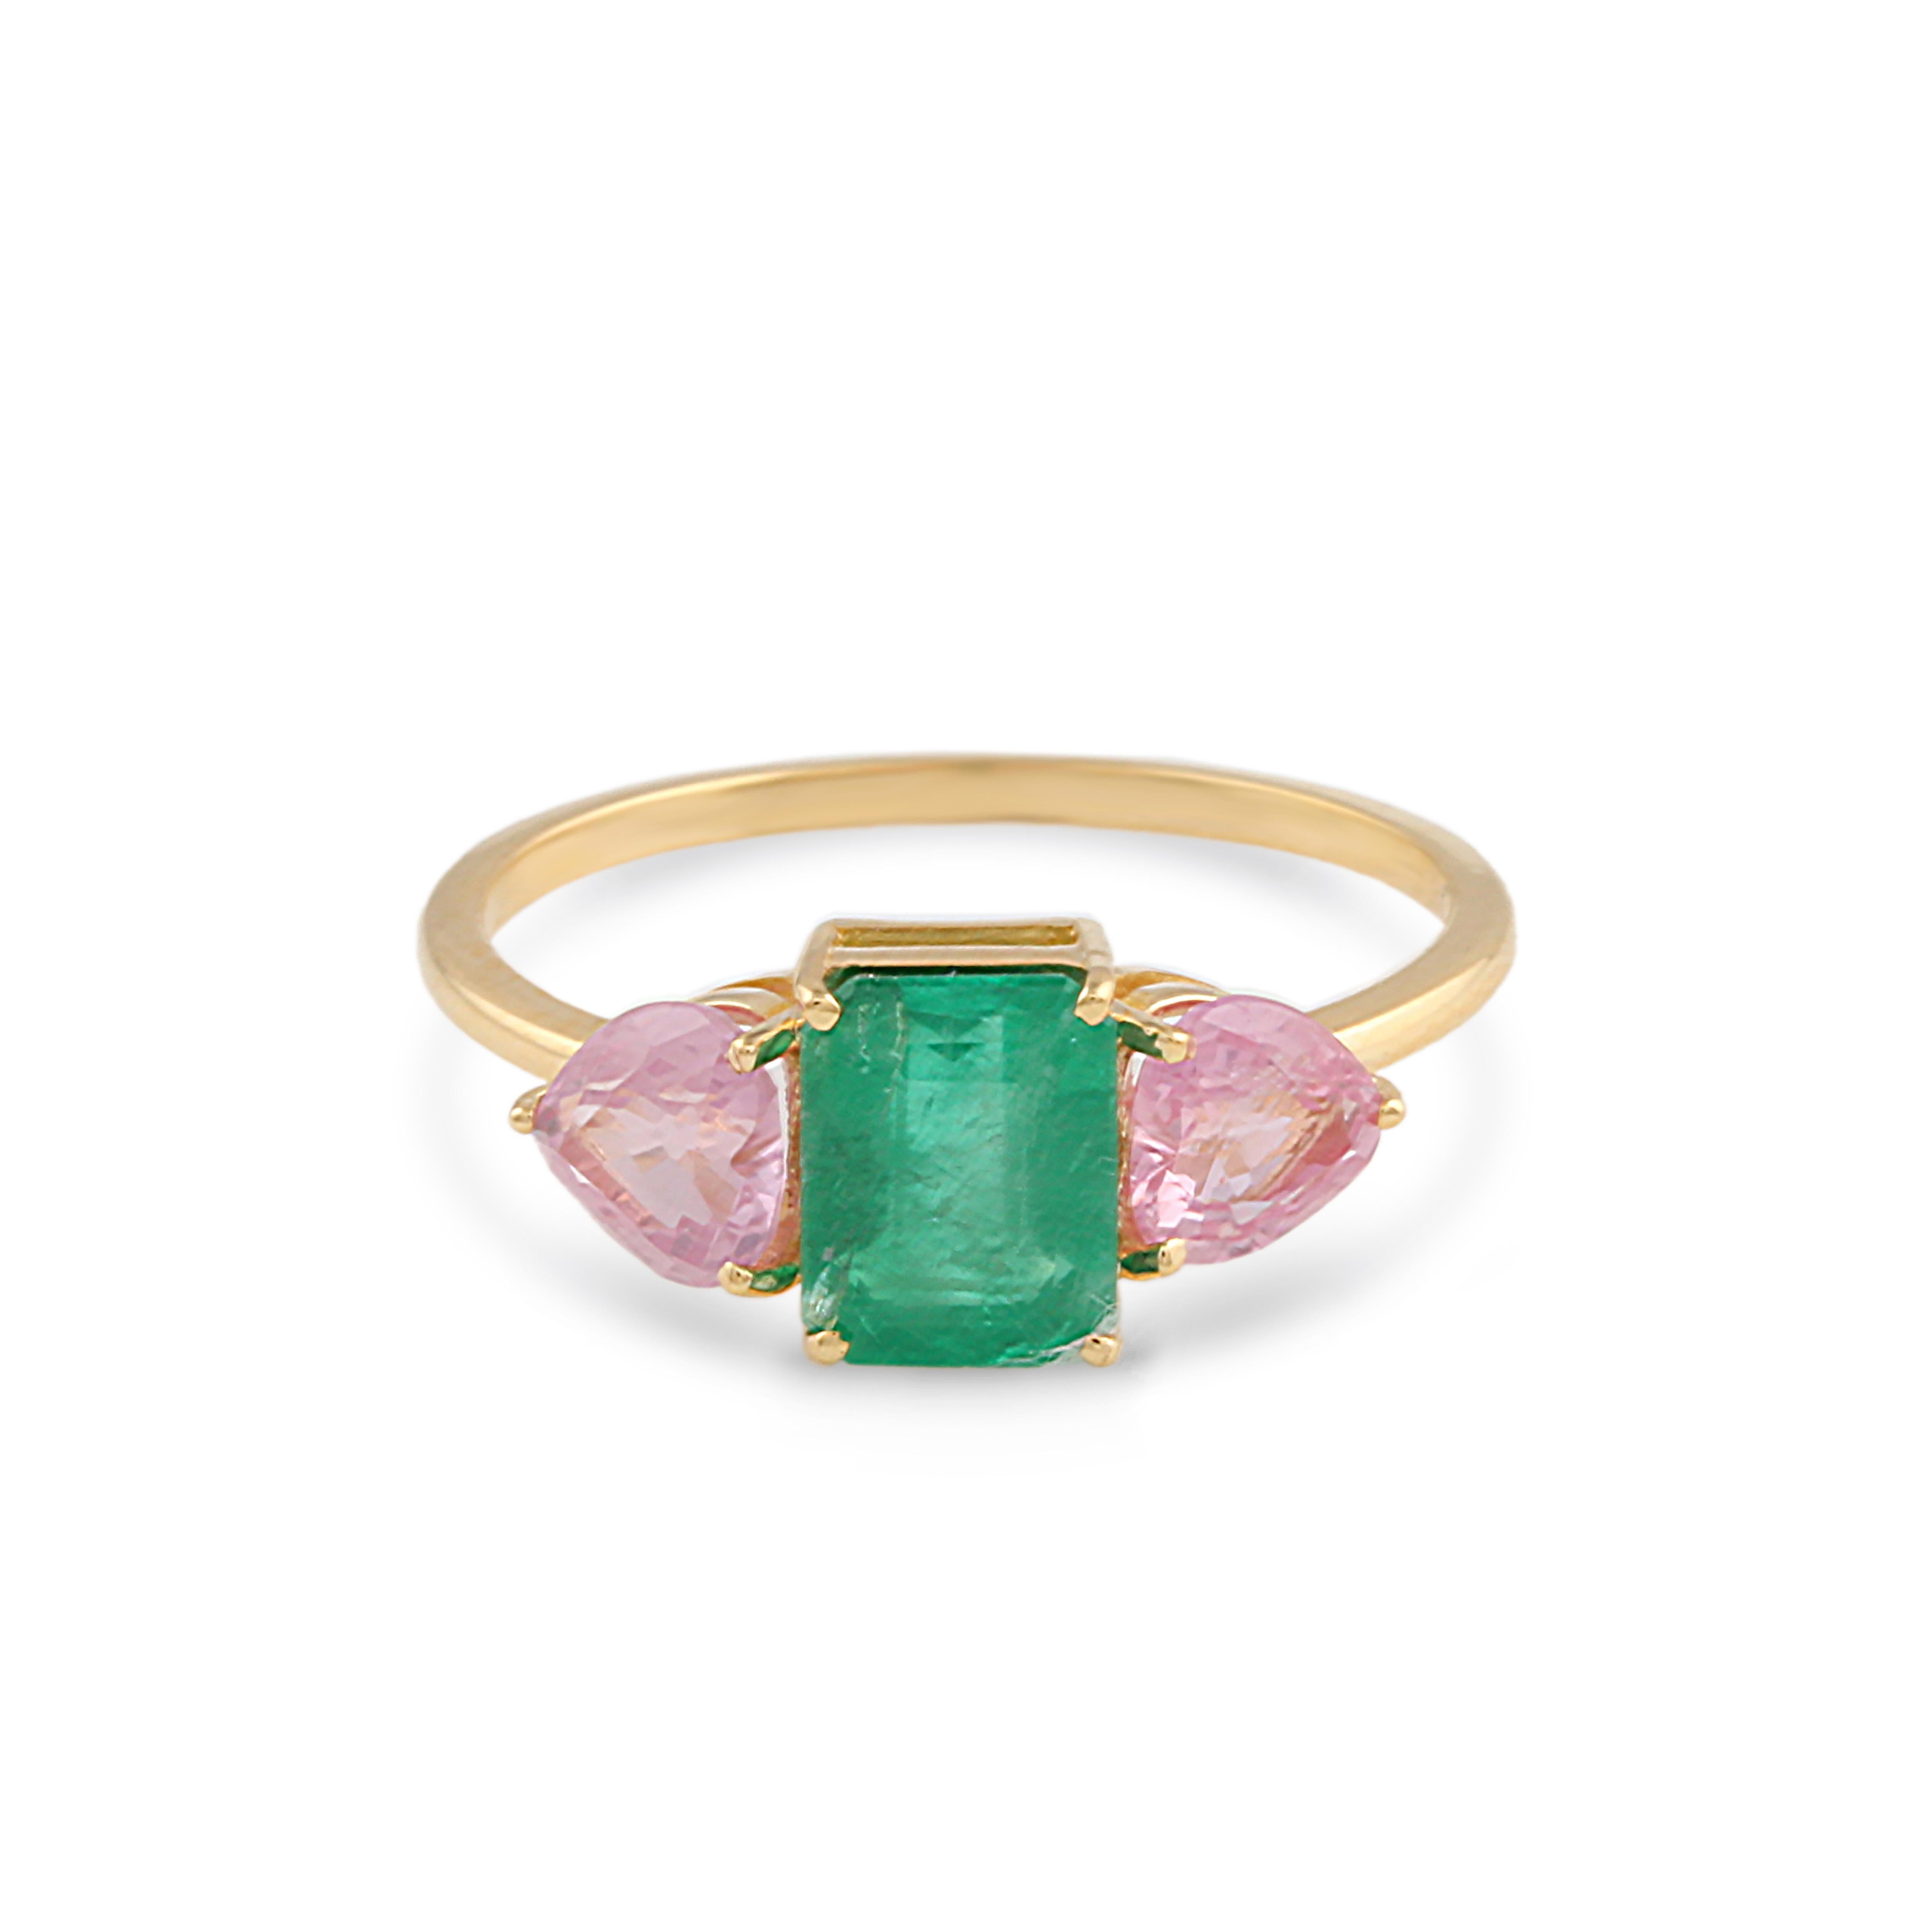 Tresor Beautiful Ring feature 2.15 carats of Gemstone. The Ring are an ode to the luxurious yet classic beauty with sparkly gemstones and feminine hues. Their contemporary and modern design make them perfect and versatile to be worn at any occasion. 